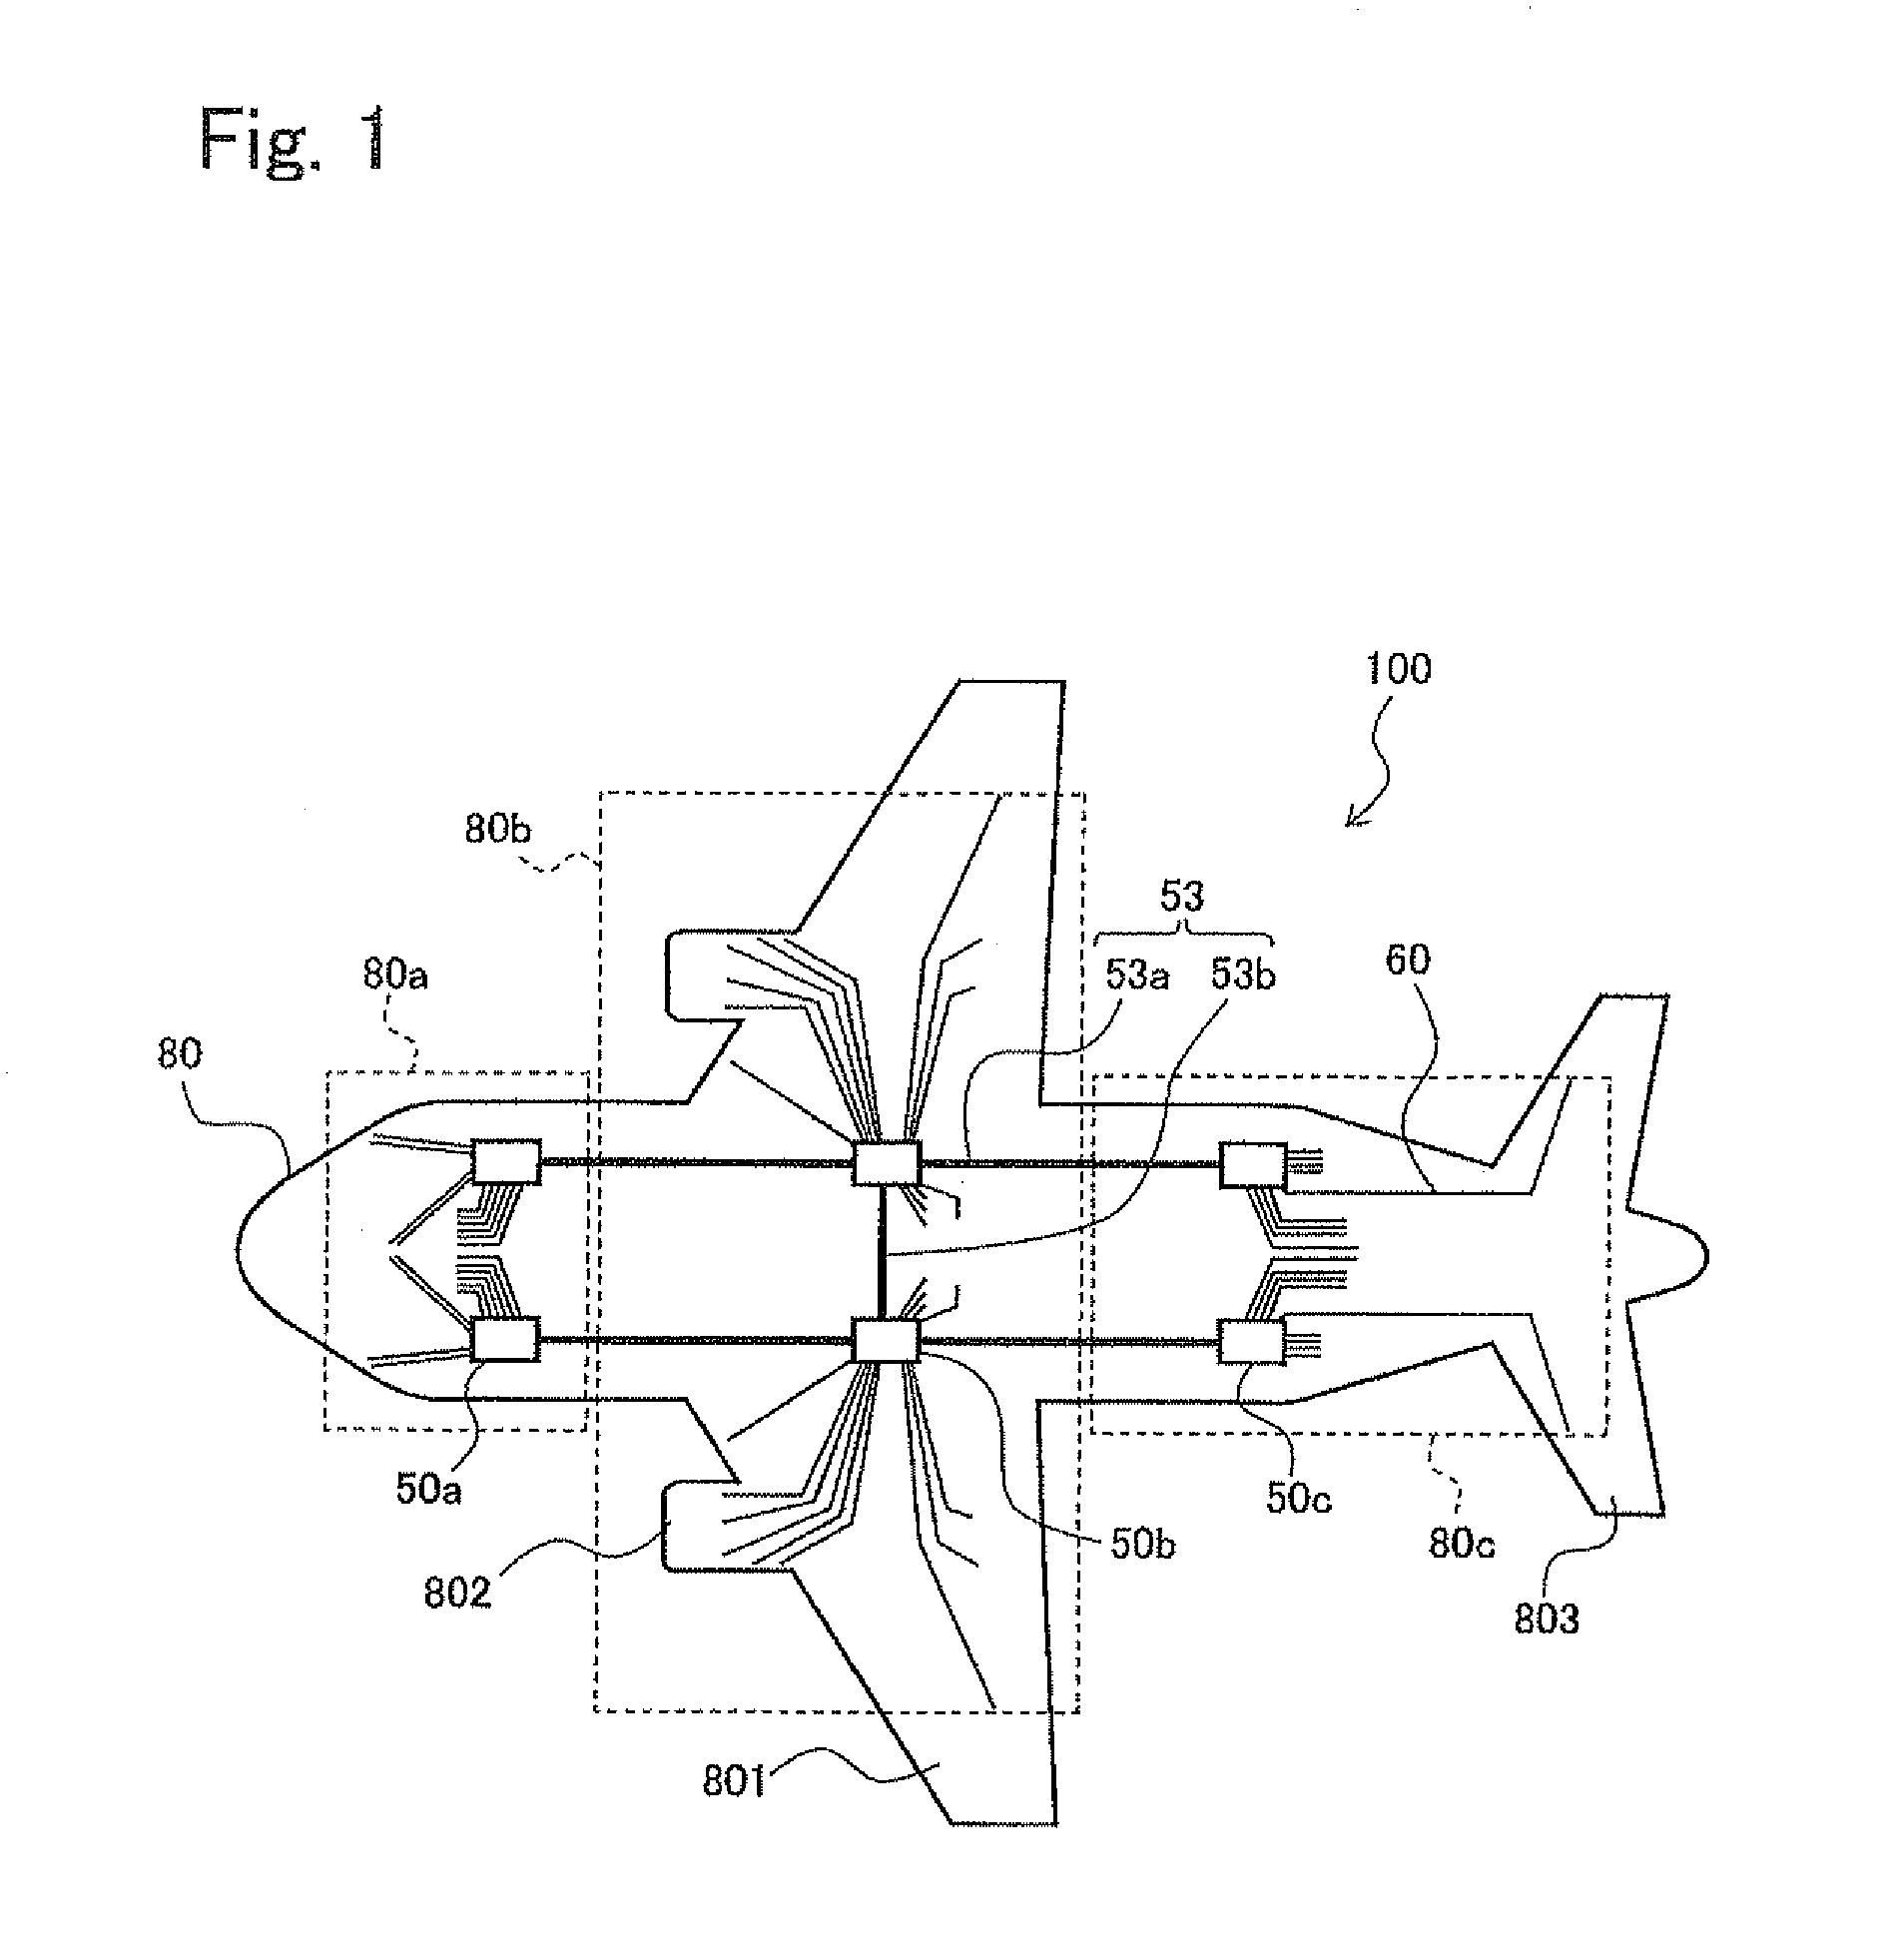 Integrated electronic system mounted on aircraft